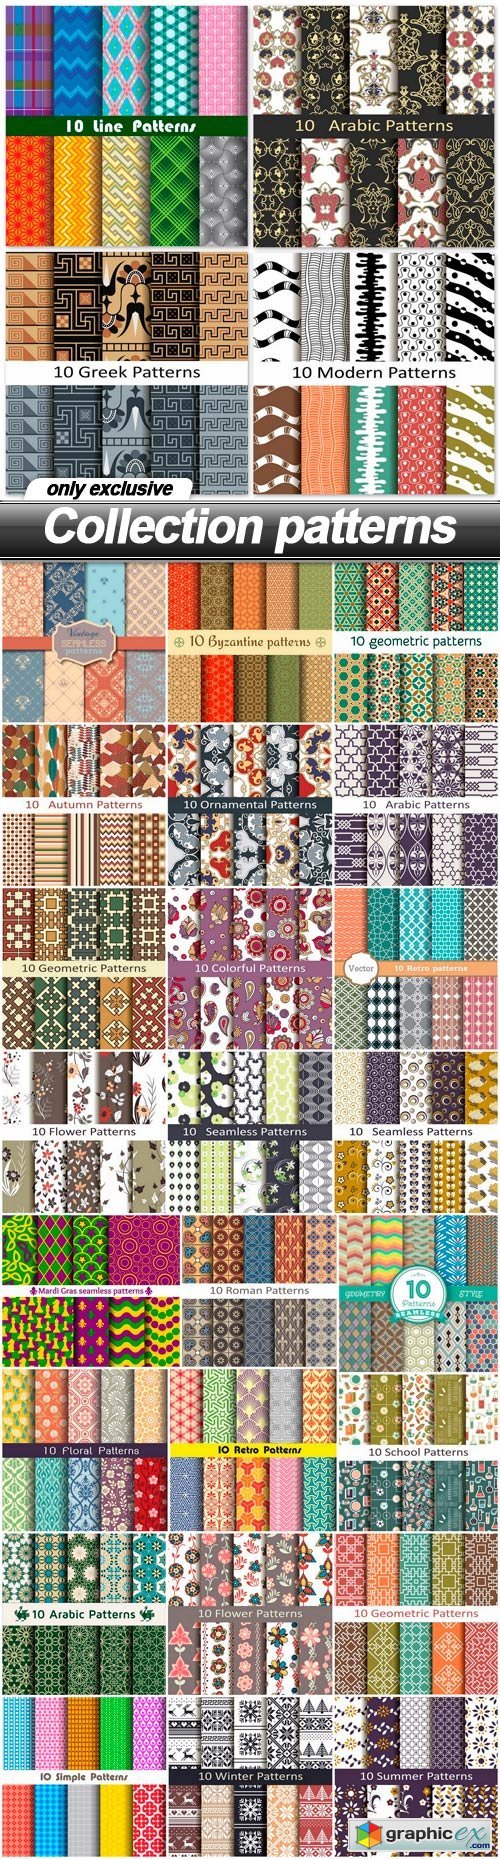 Collection patterns - 28 EPS